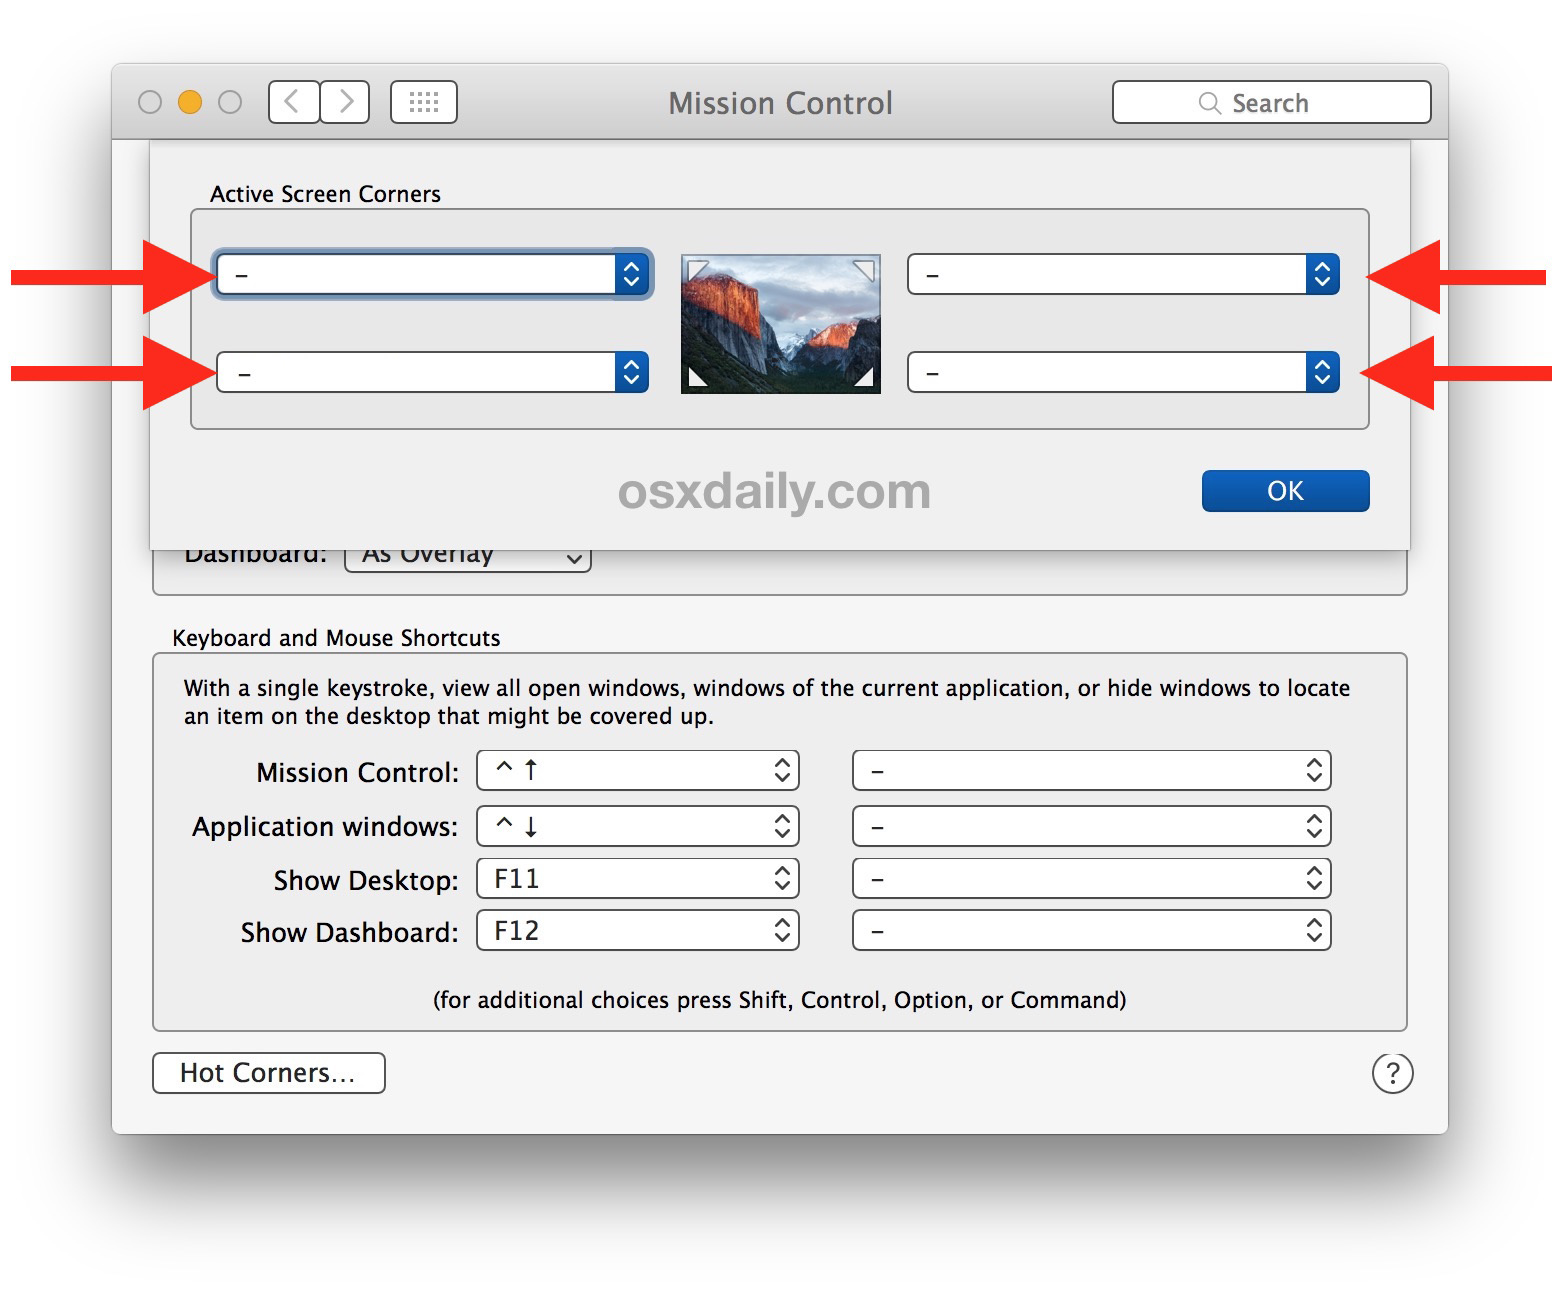 How to Disable Hot Corners in Mac OS X - Image 2